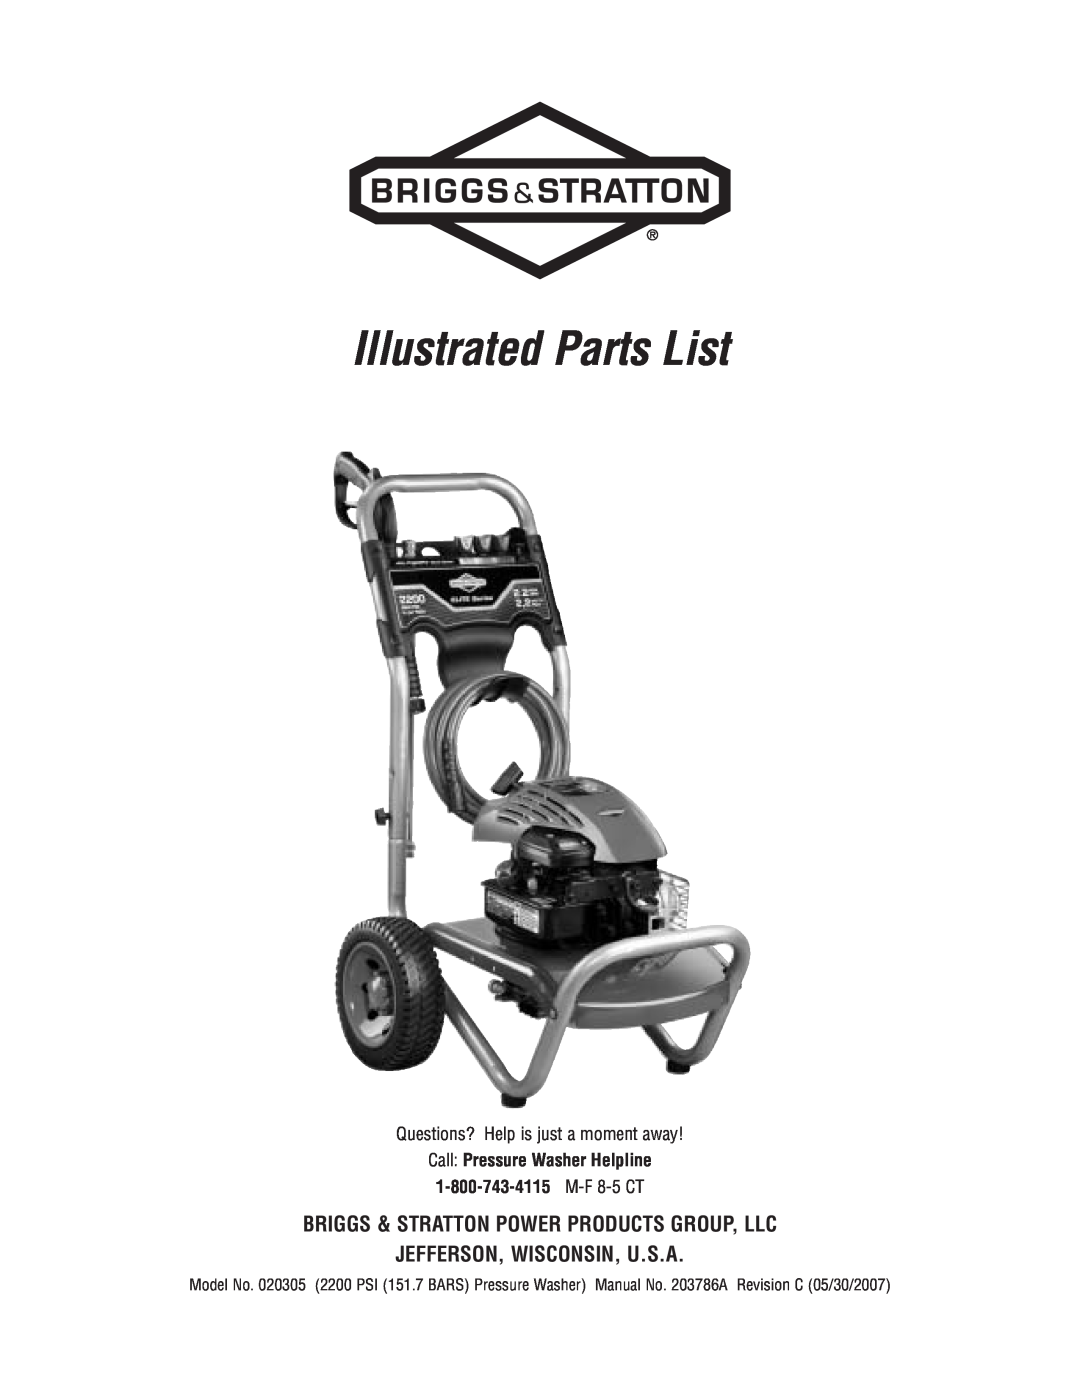 Briggs & Stratton 20305 manual Illustrated Parts List, Briggs & Stratton Power Products Group, Llc 